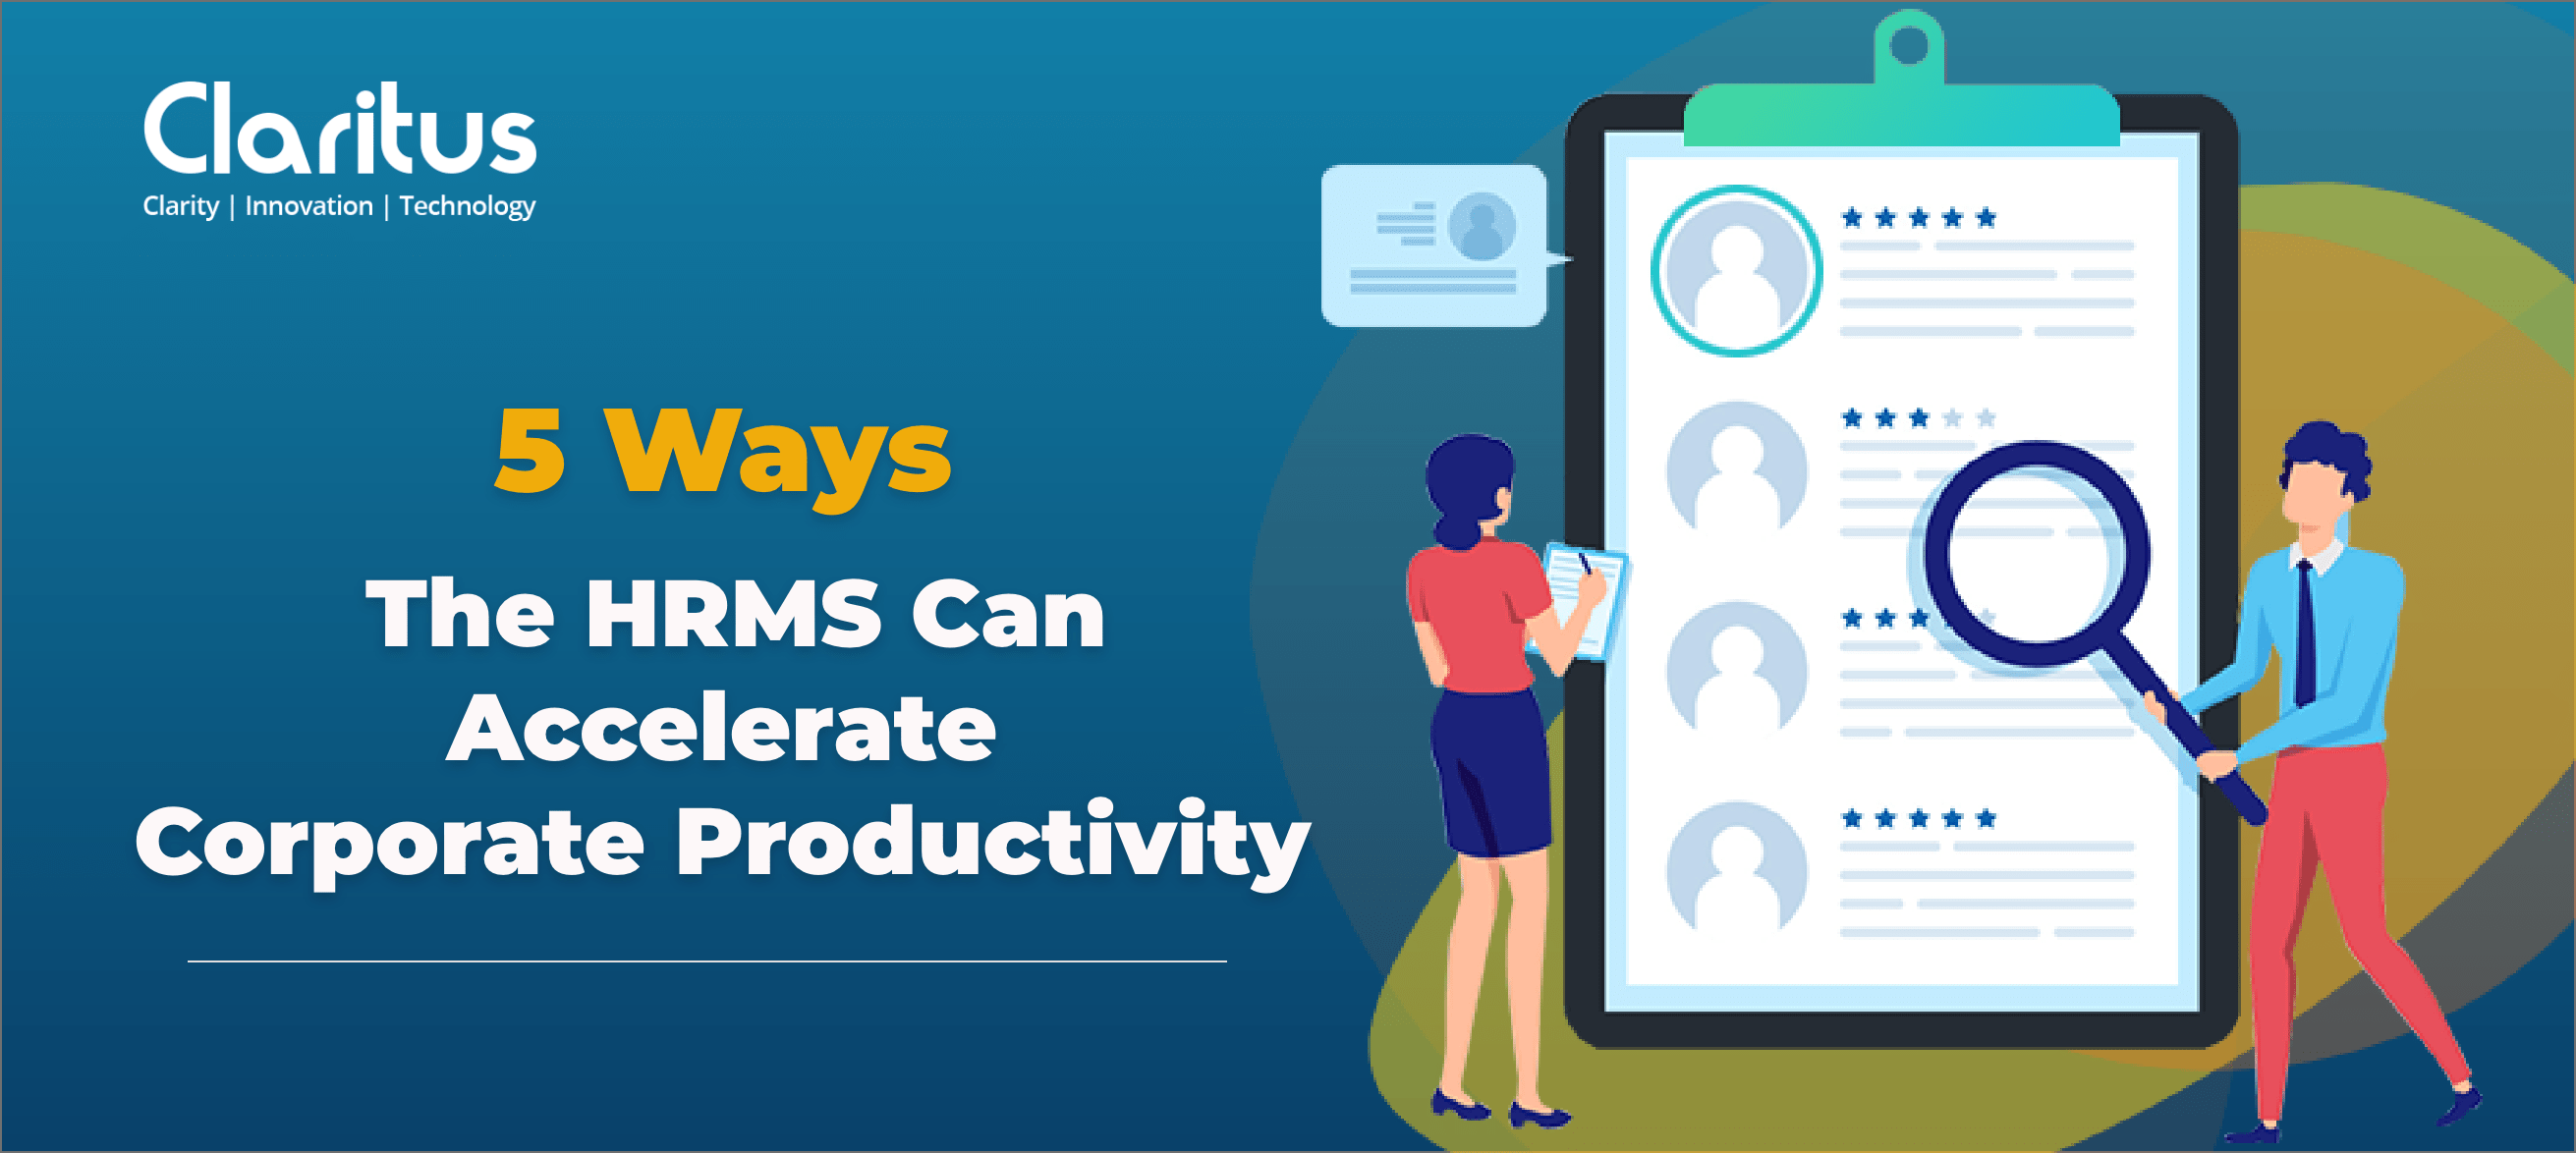 5 Ways The HRMS Can Accelerate Corporate Productivity